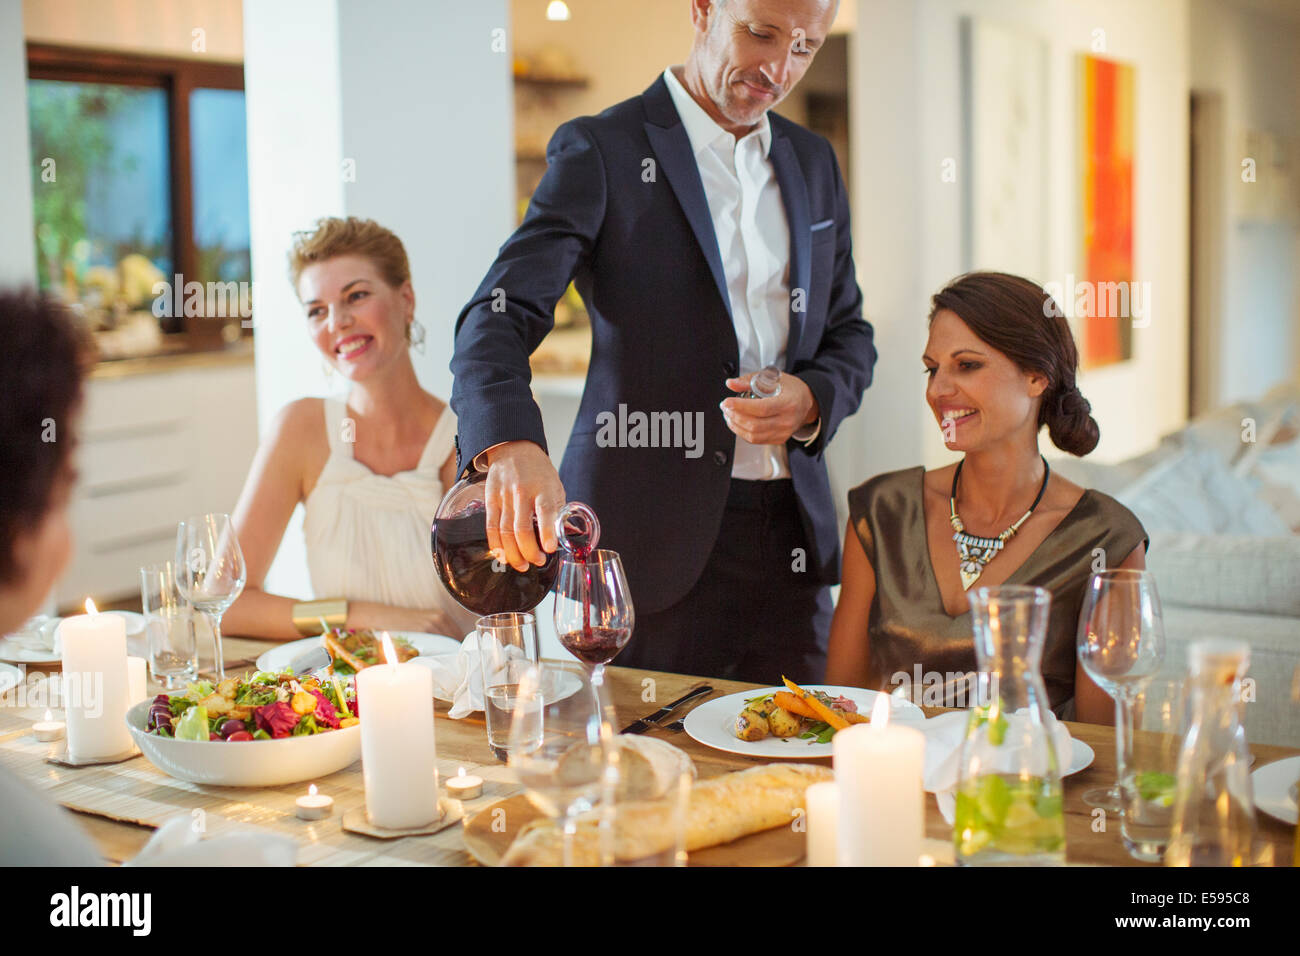 Man pouring wine at dinner party Stock Photo